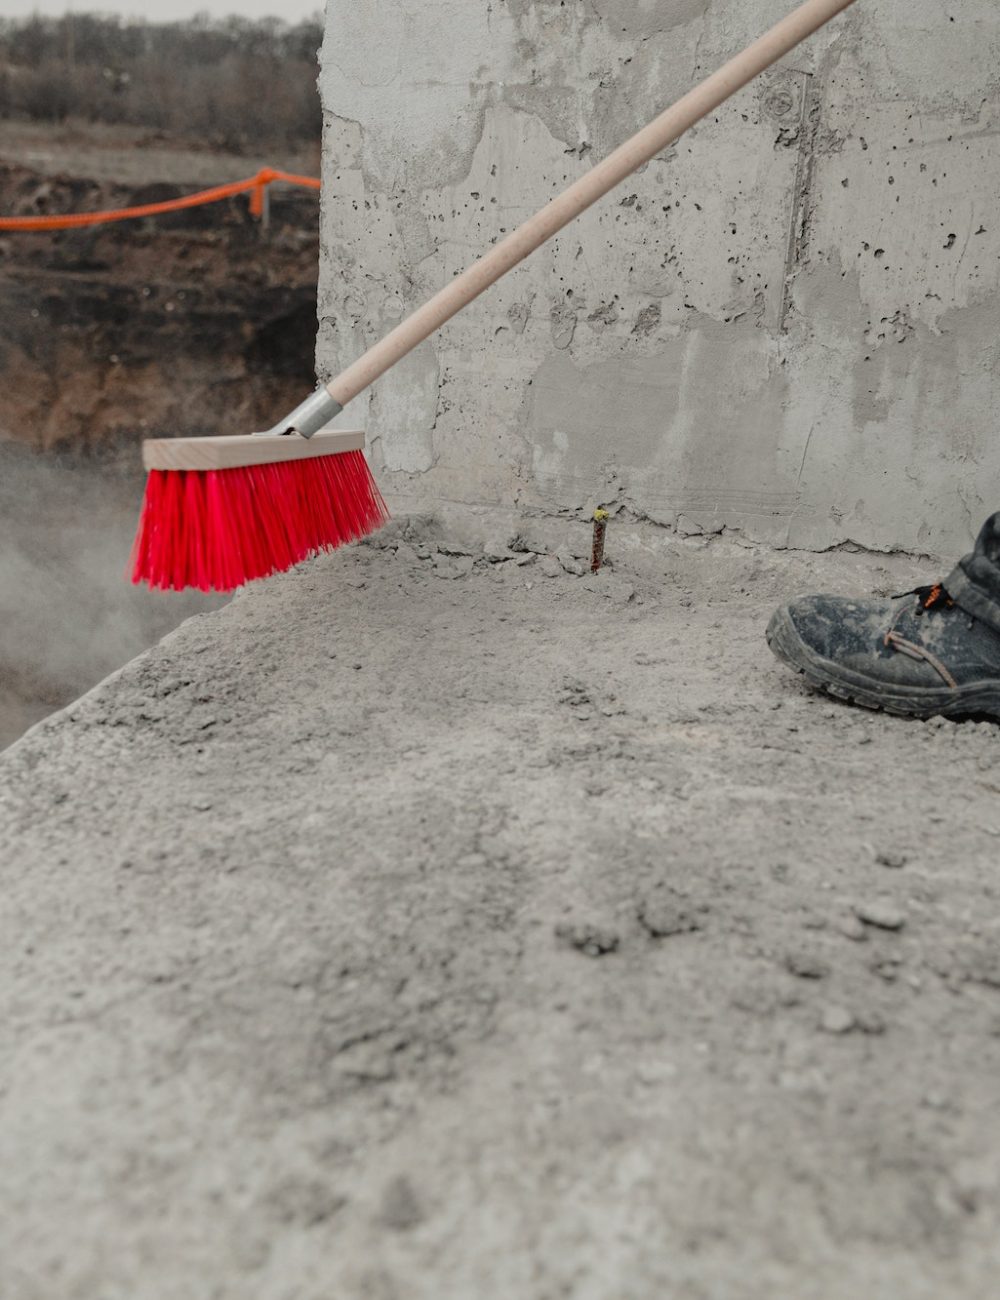 Closeup shot of a cleaning brush being used at the construction process